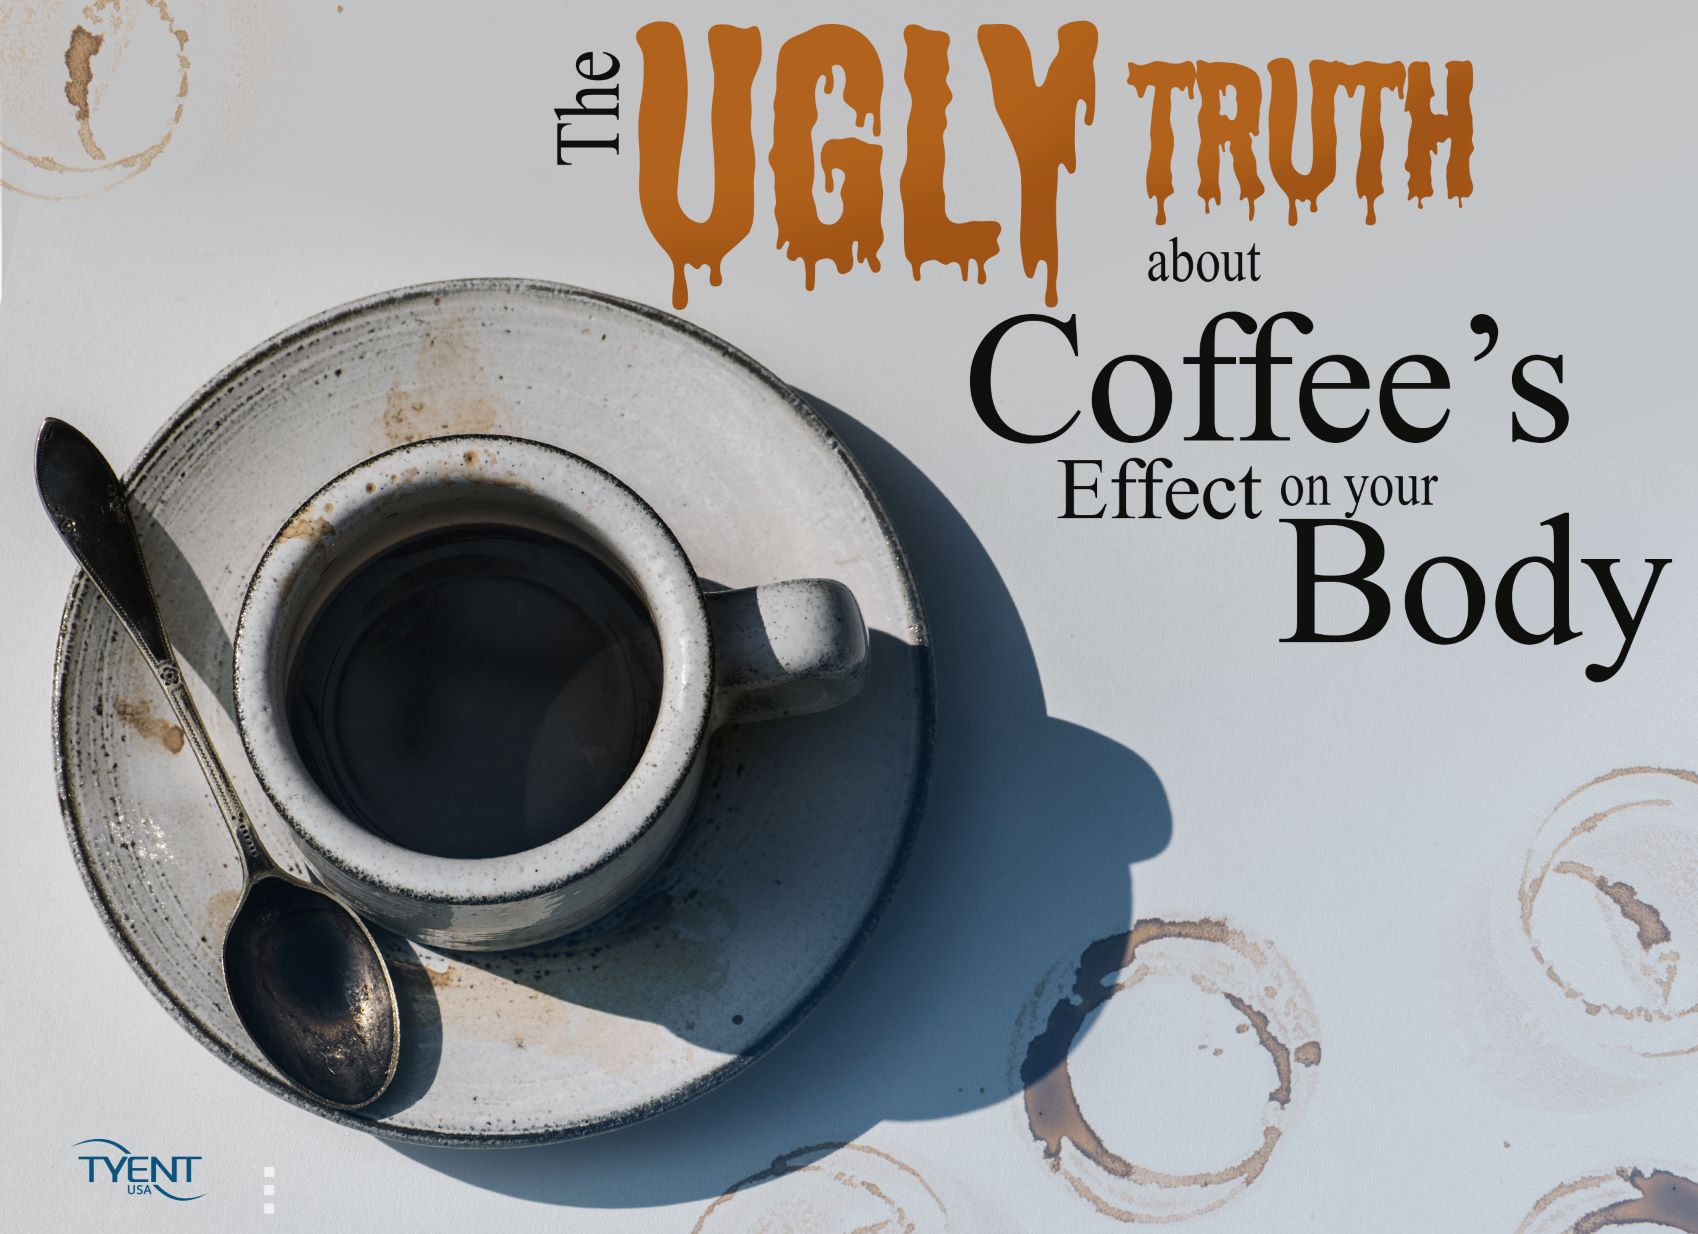 The Ugly Truth About Coffee’s Effects on Your Body